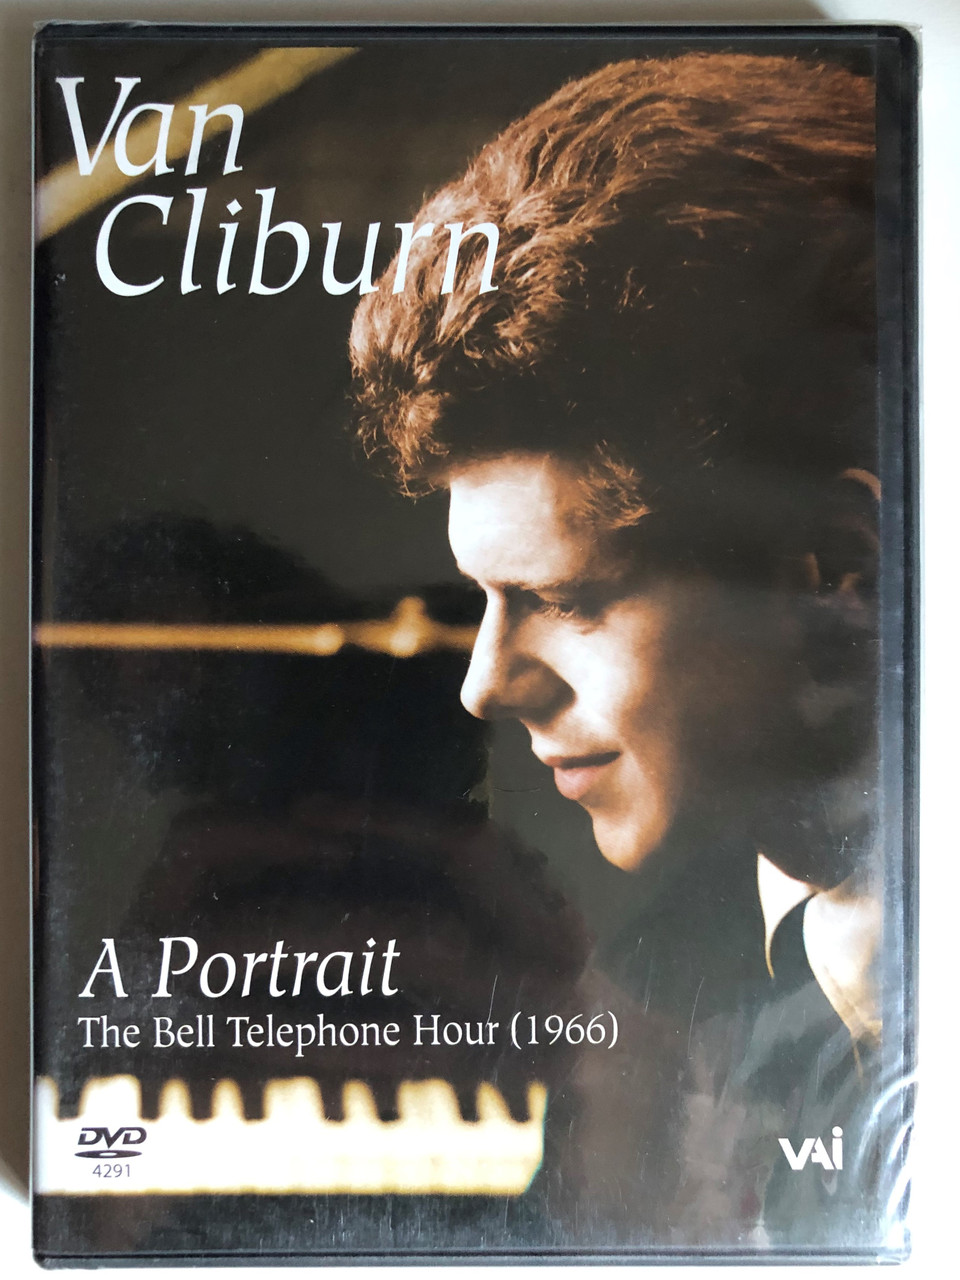 From_Cliburn_A_Portrait_The_Bell_Telephone_Hour_1967_Tchaikovskys_Piano_Concerto_No._1_DVD_Bonus_From_The_Bell_Telephone_Hour_telecast_of_93060_Schumann-Liszt_Dedication_B__86073.1691926743.1280.1280.JPG (960×1280)